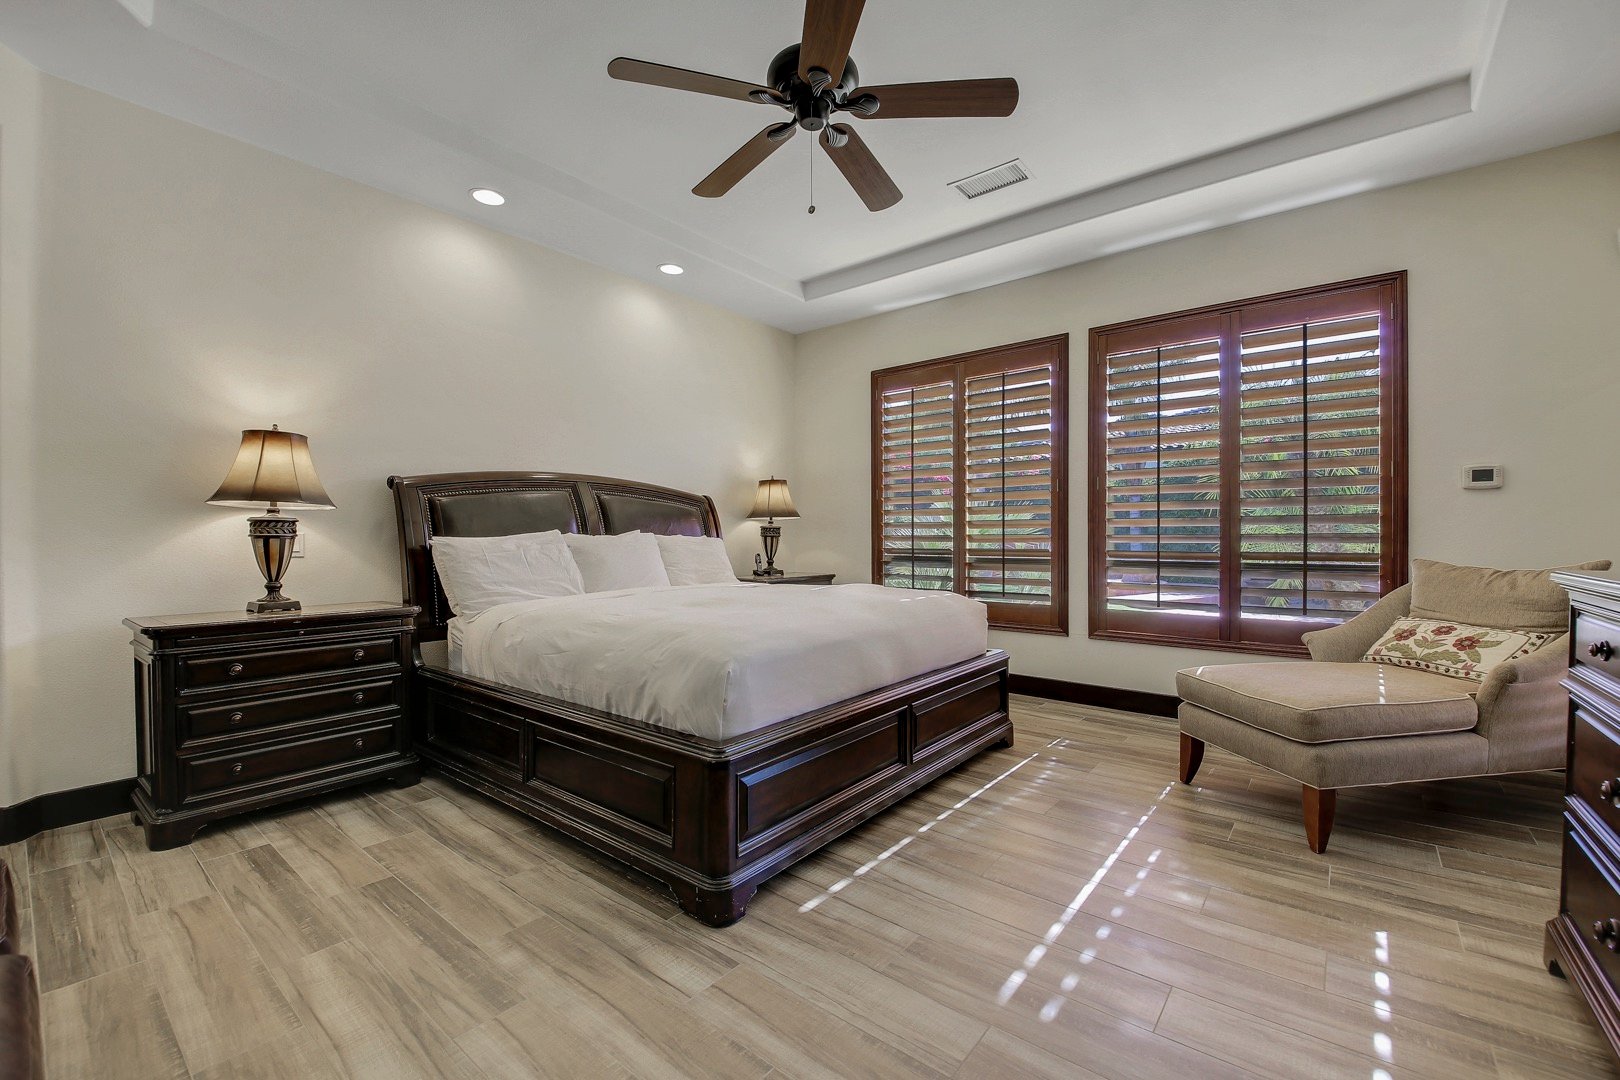 Master Suite 1 is located next to entrance doors and features a King-sized bed and Queen-sized sofa sleeper.